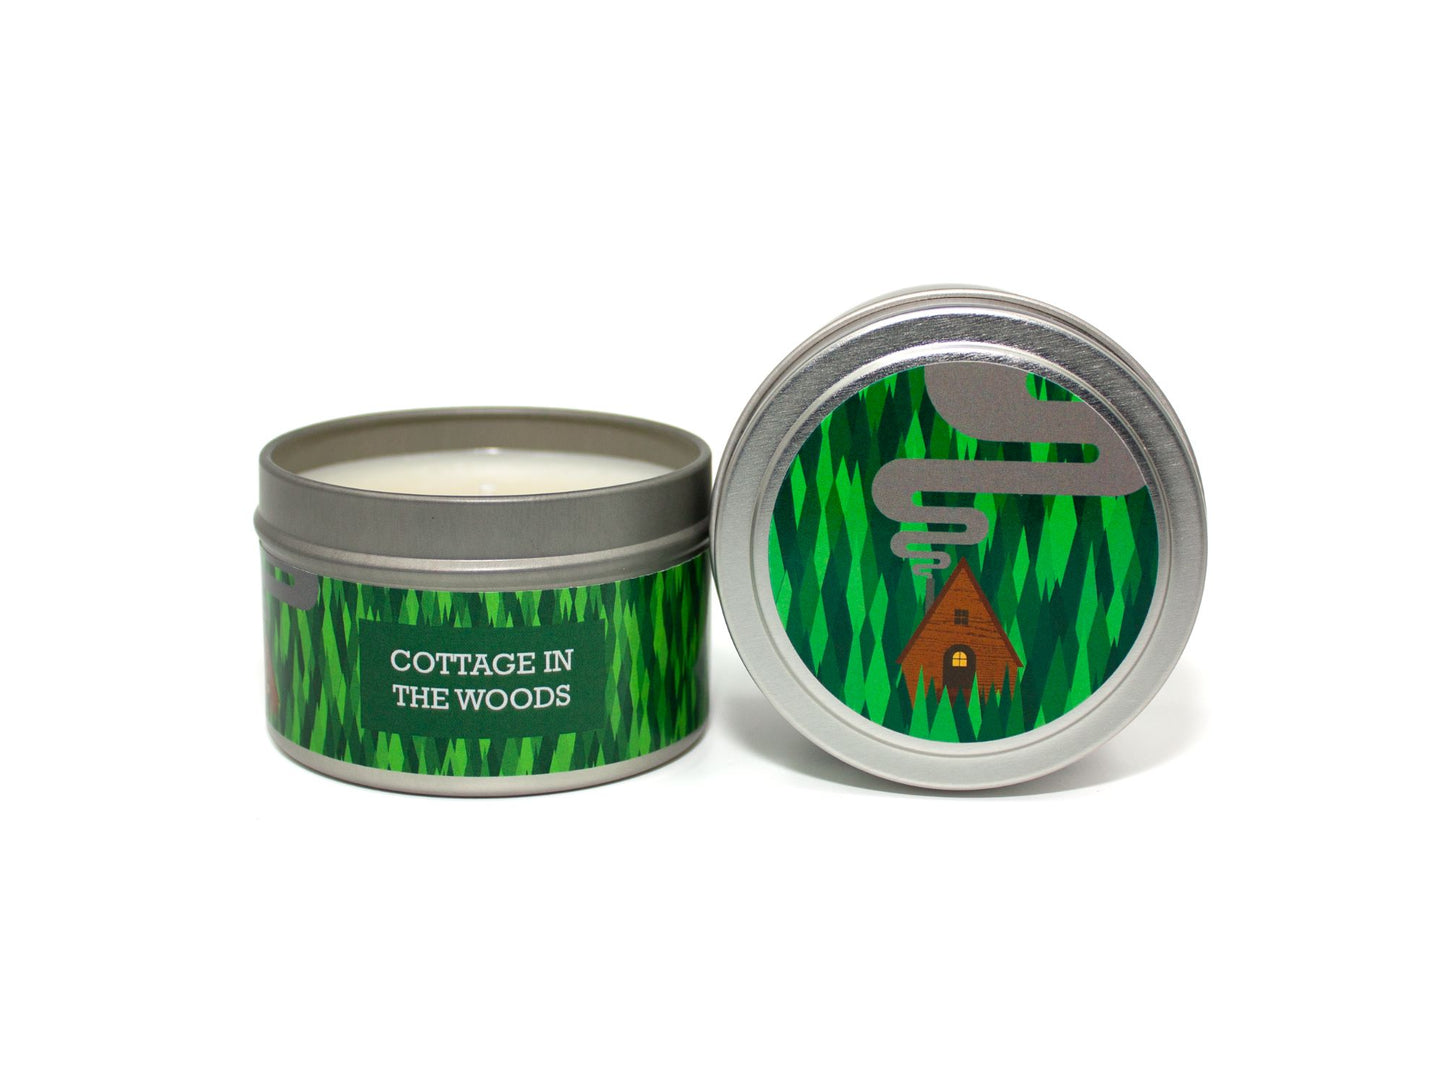 Onset & Rime pine and berries scented candle called "Cottage in the Woods" in a 4 oz silver tin. The circular label on top depicts a green pine forest and a small cottage with smoke rising from the chimney. The text on the front label is "Cottage in the Woods - Fir Trees, Forest Floor, Wild Berries".